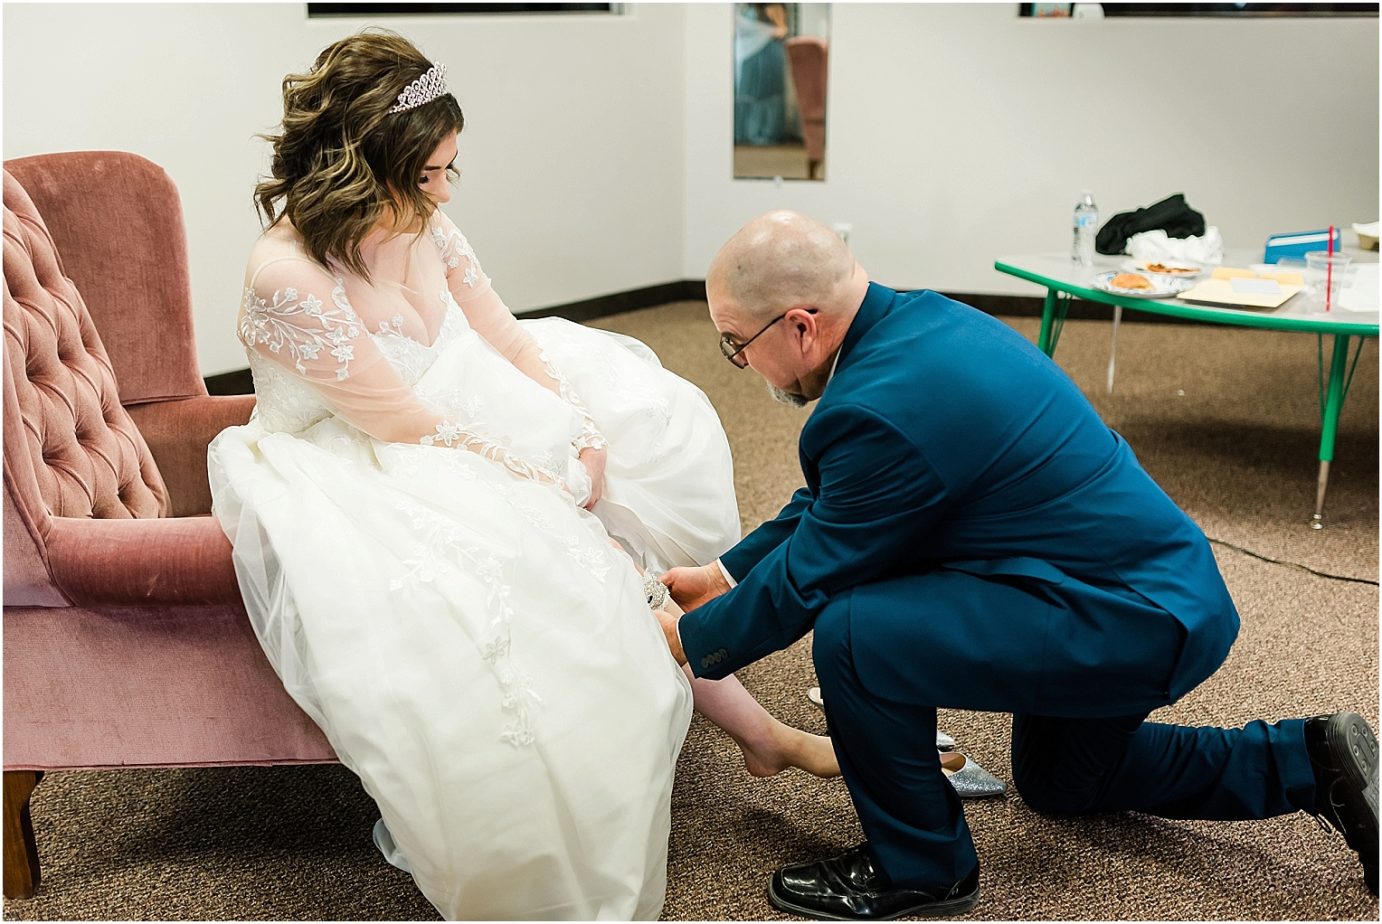 Intimate church wedding othello wa Melic and ashley brides dad putting on her shoes